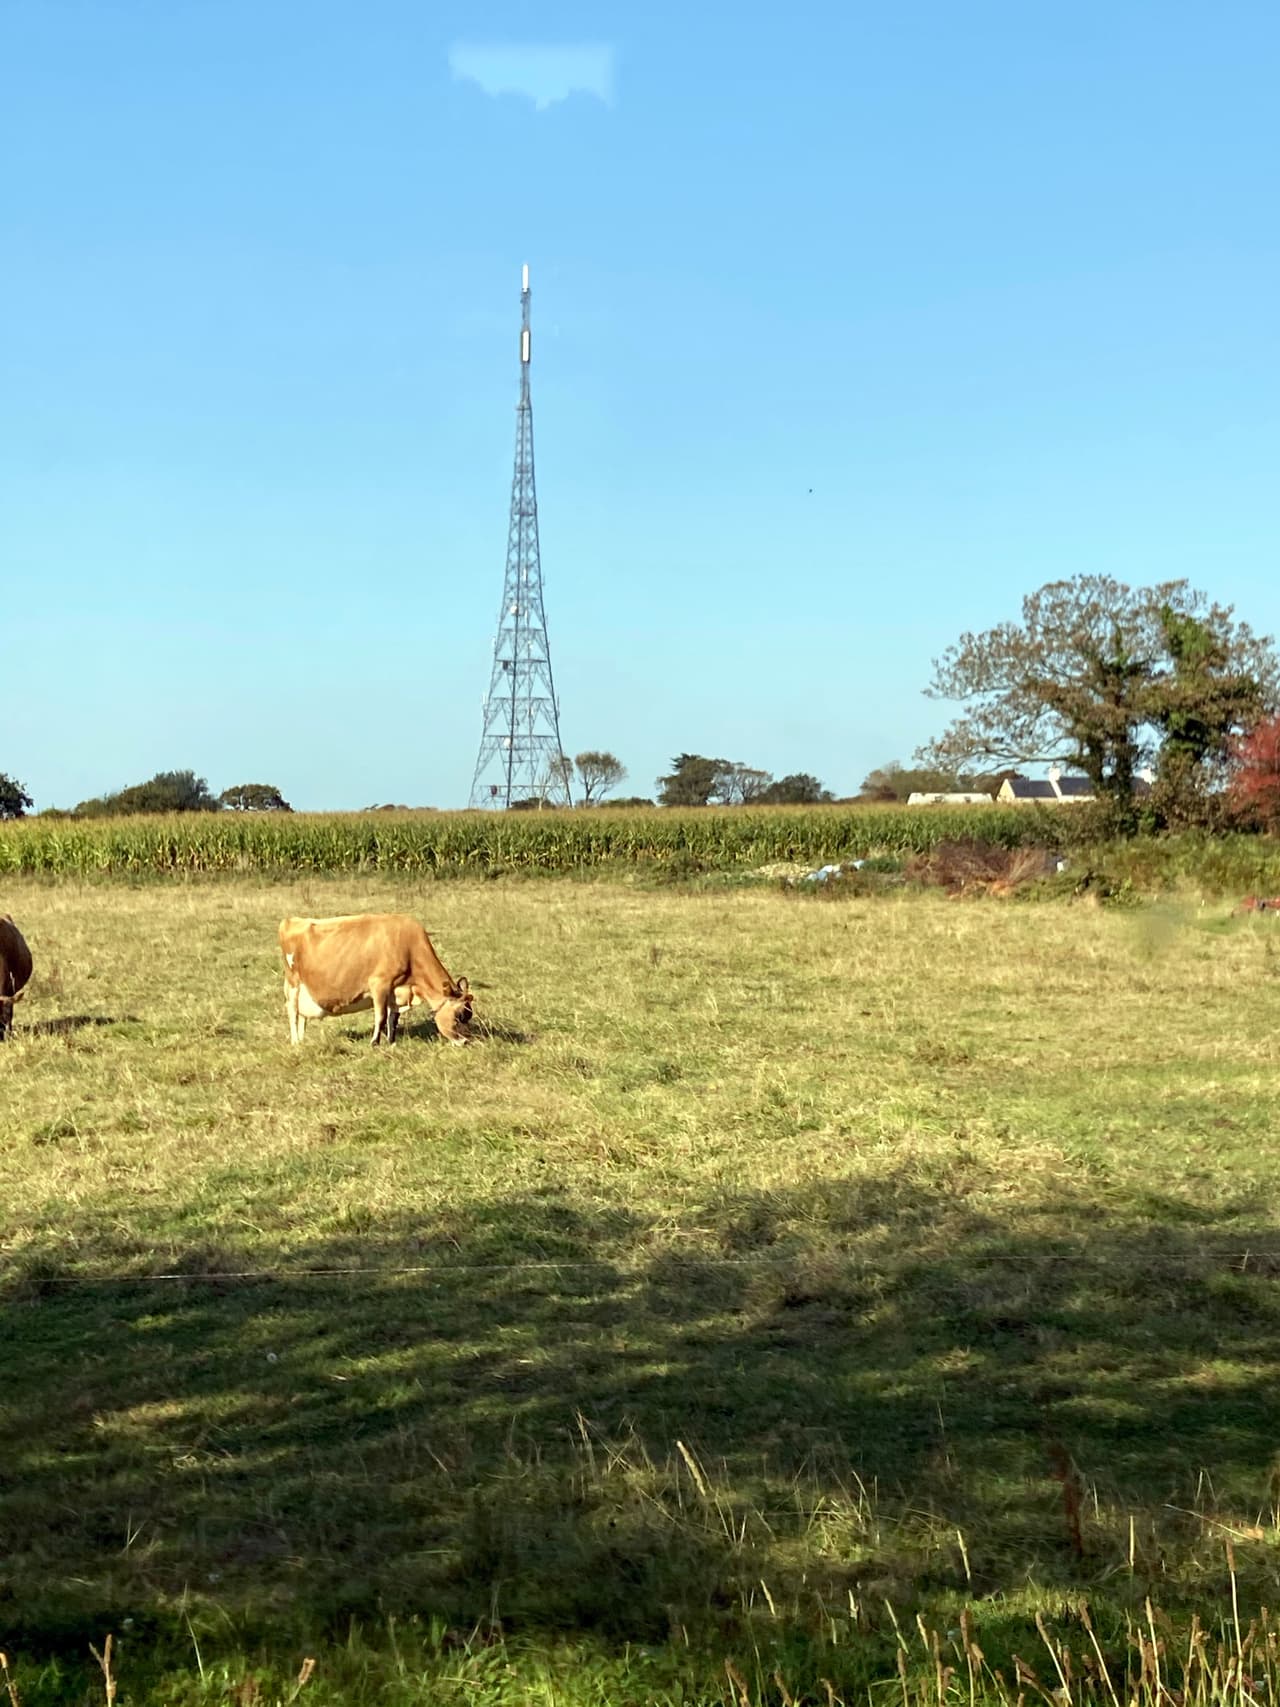 A jersey cow grazing in front of a telephone mast